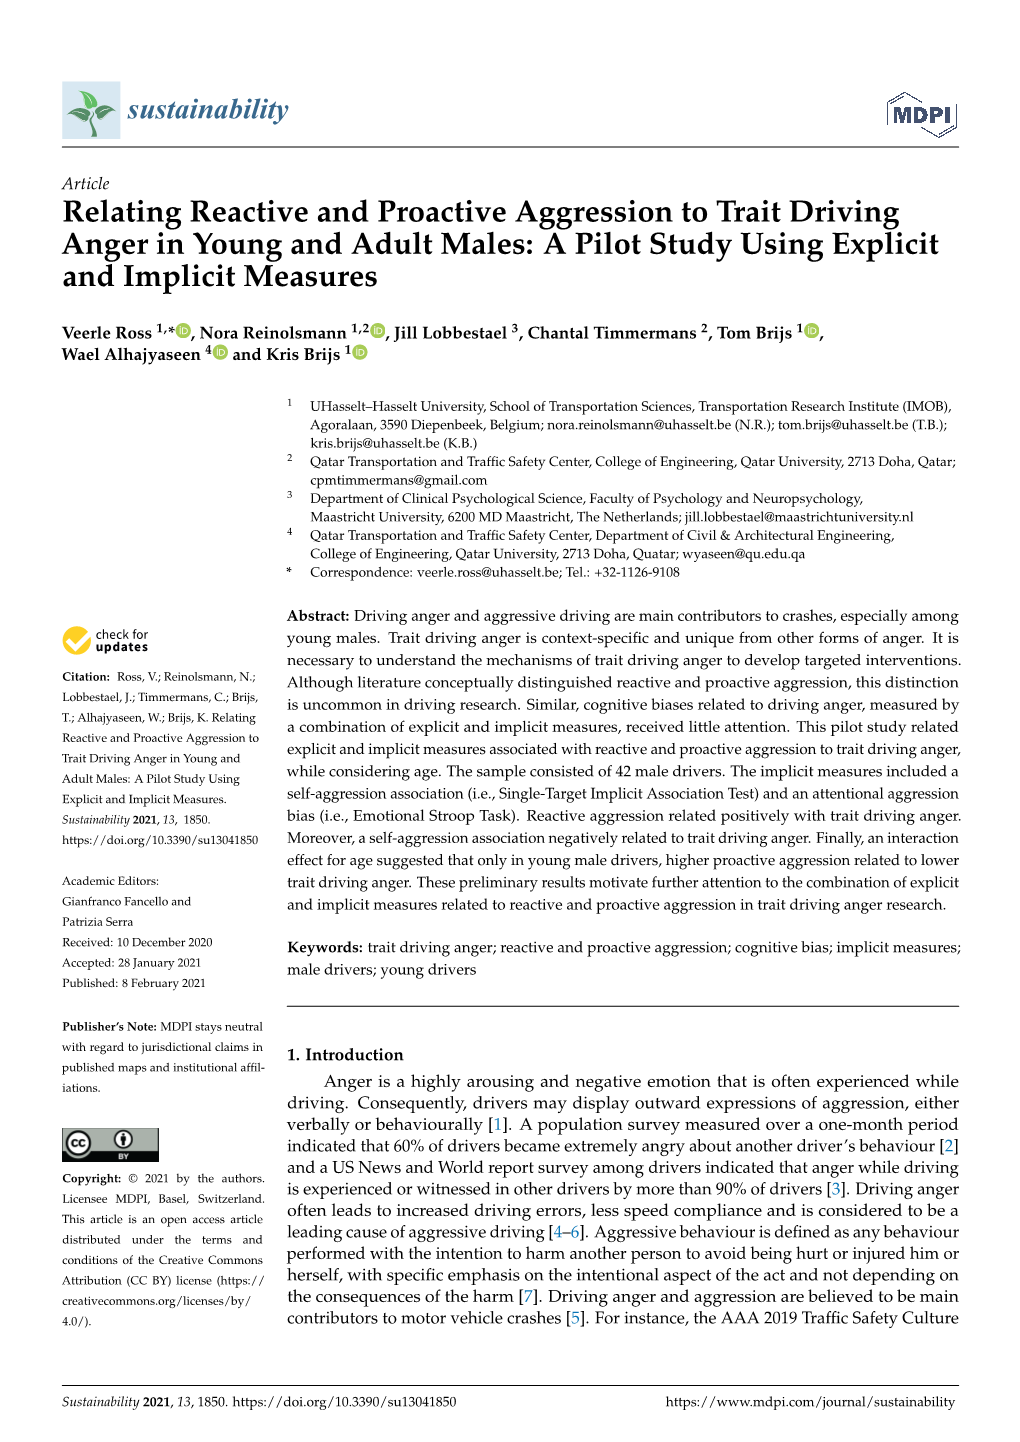 Relating Reactive and Proactive Aggression to Trait Driving Anger in Young and Adult Males: a Pilot Study Using Explicit and Implicit Measures